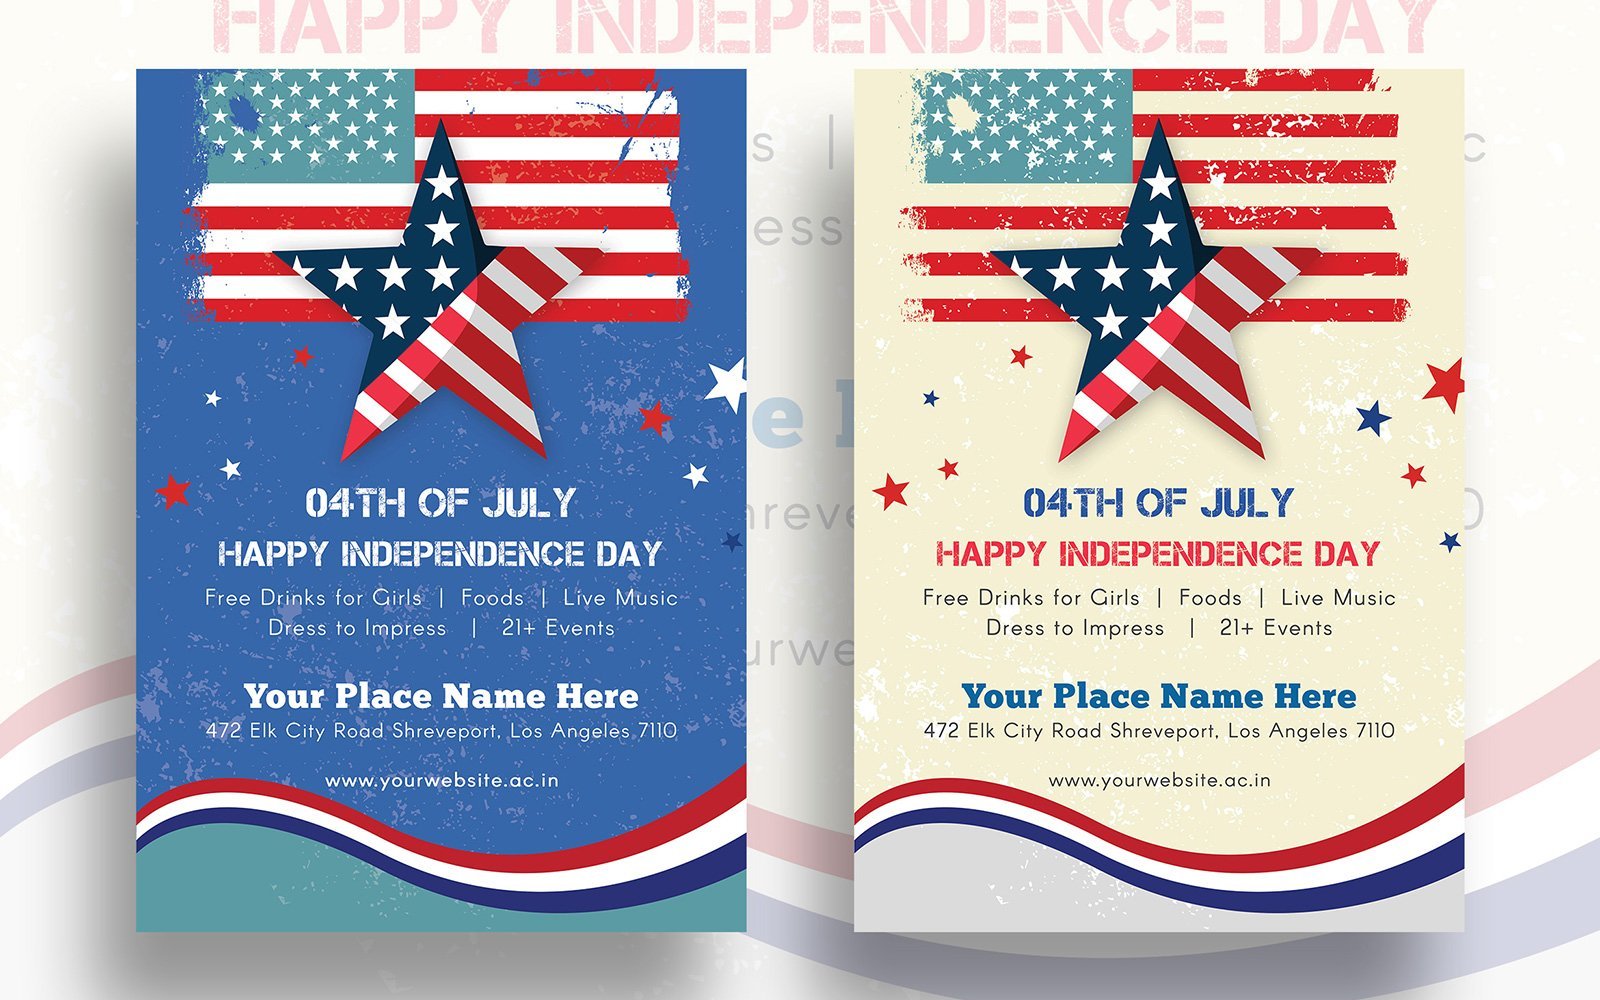 Kit Graphique #162406 Independence Day Divers Modles Web - Logo template Preview